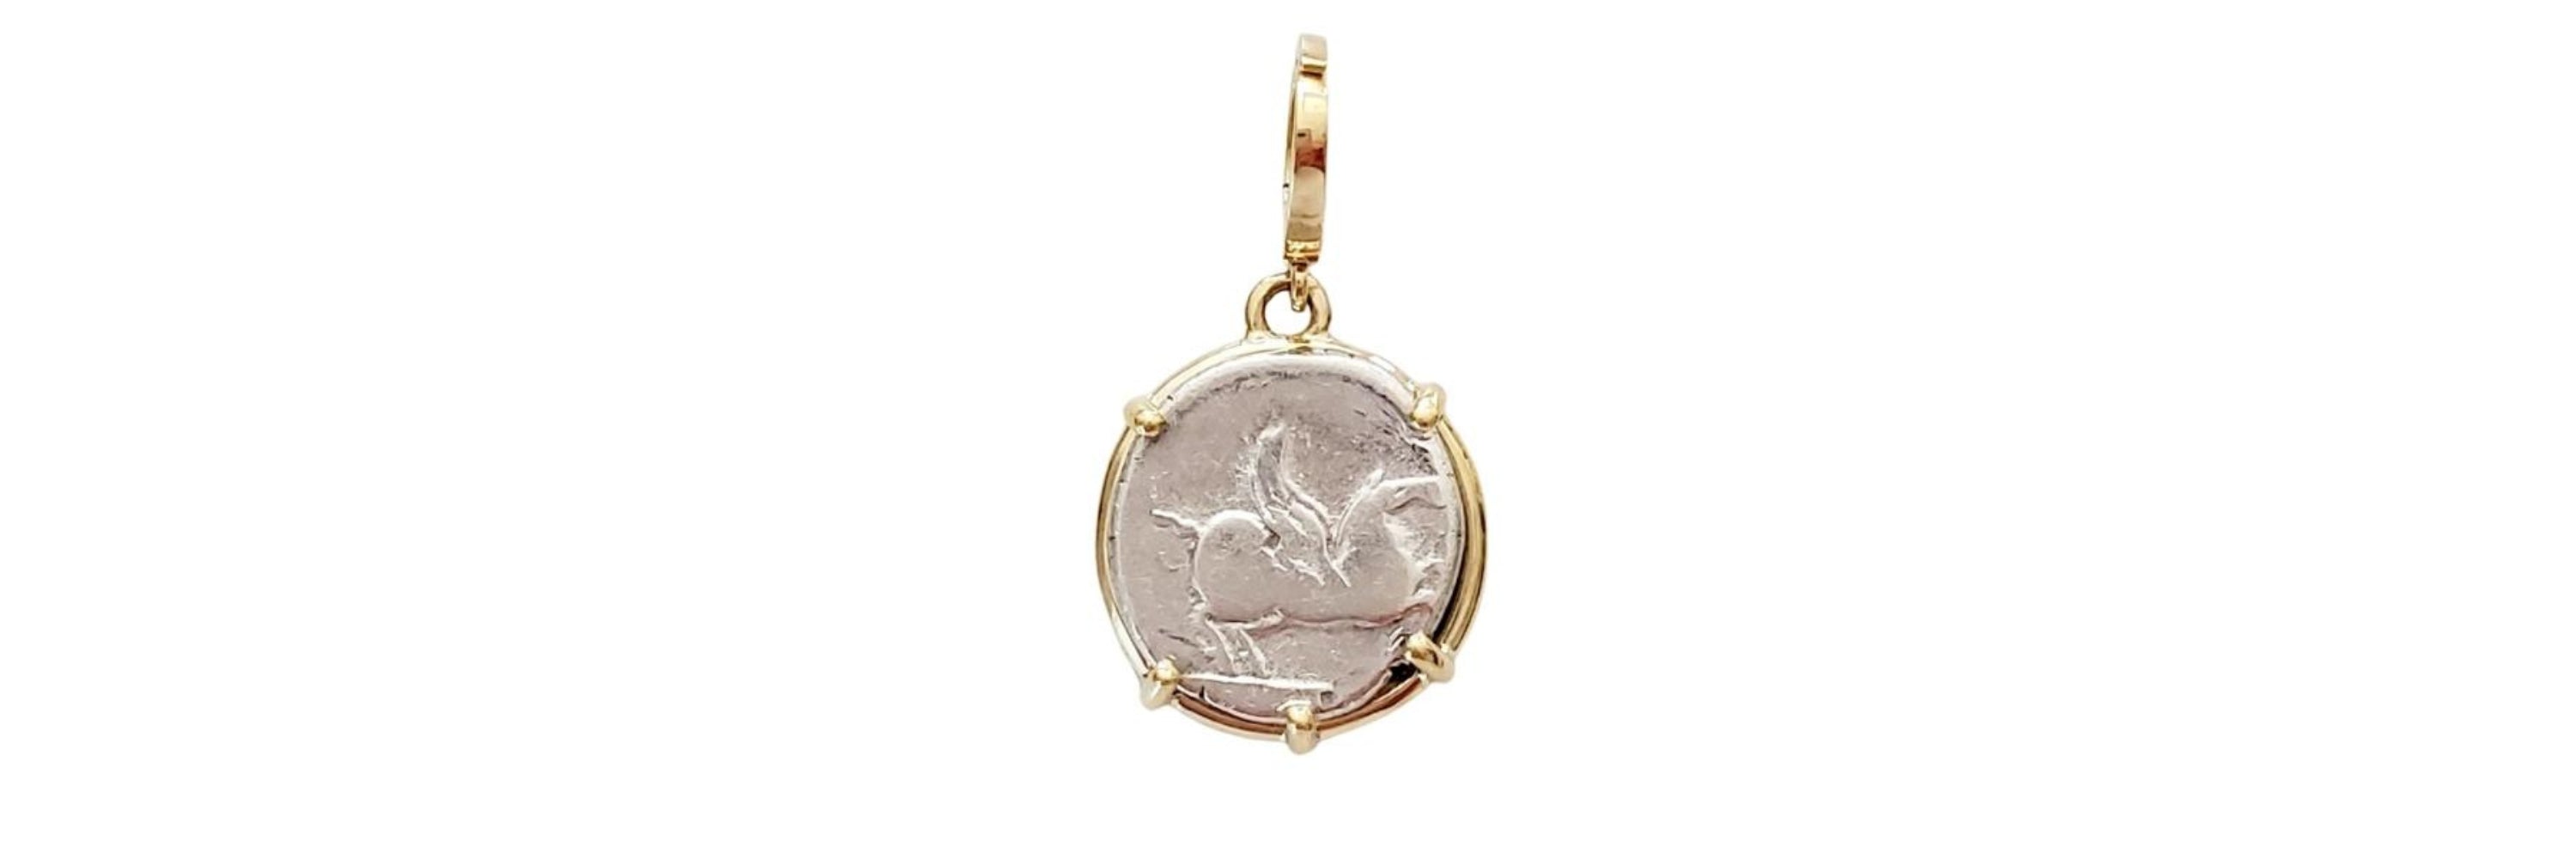 Ancient coins of mythical creatures re-created into jewelry